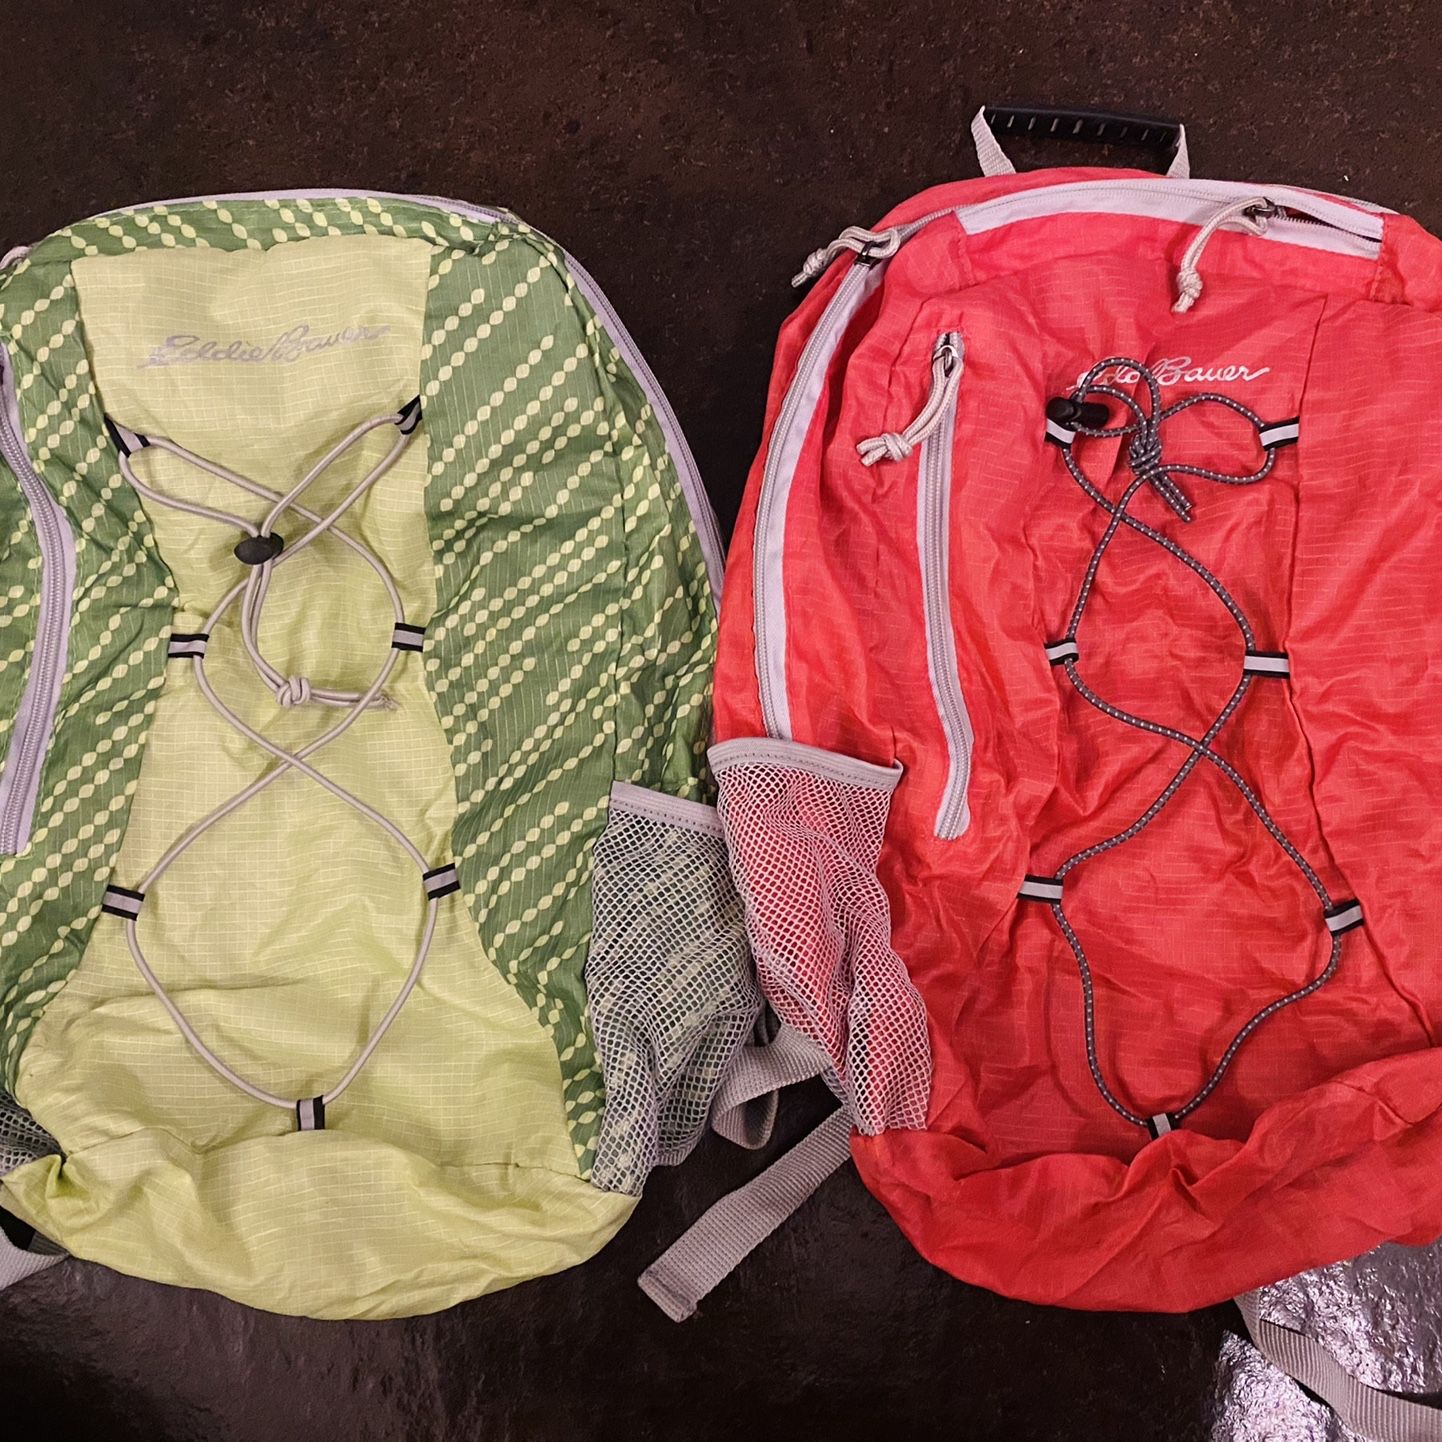 2 Set Of Foldable Collapsible Eddie Bauer Hiking Backpack